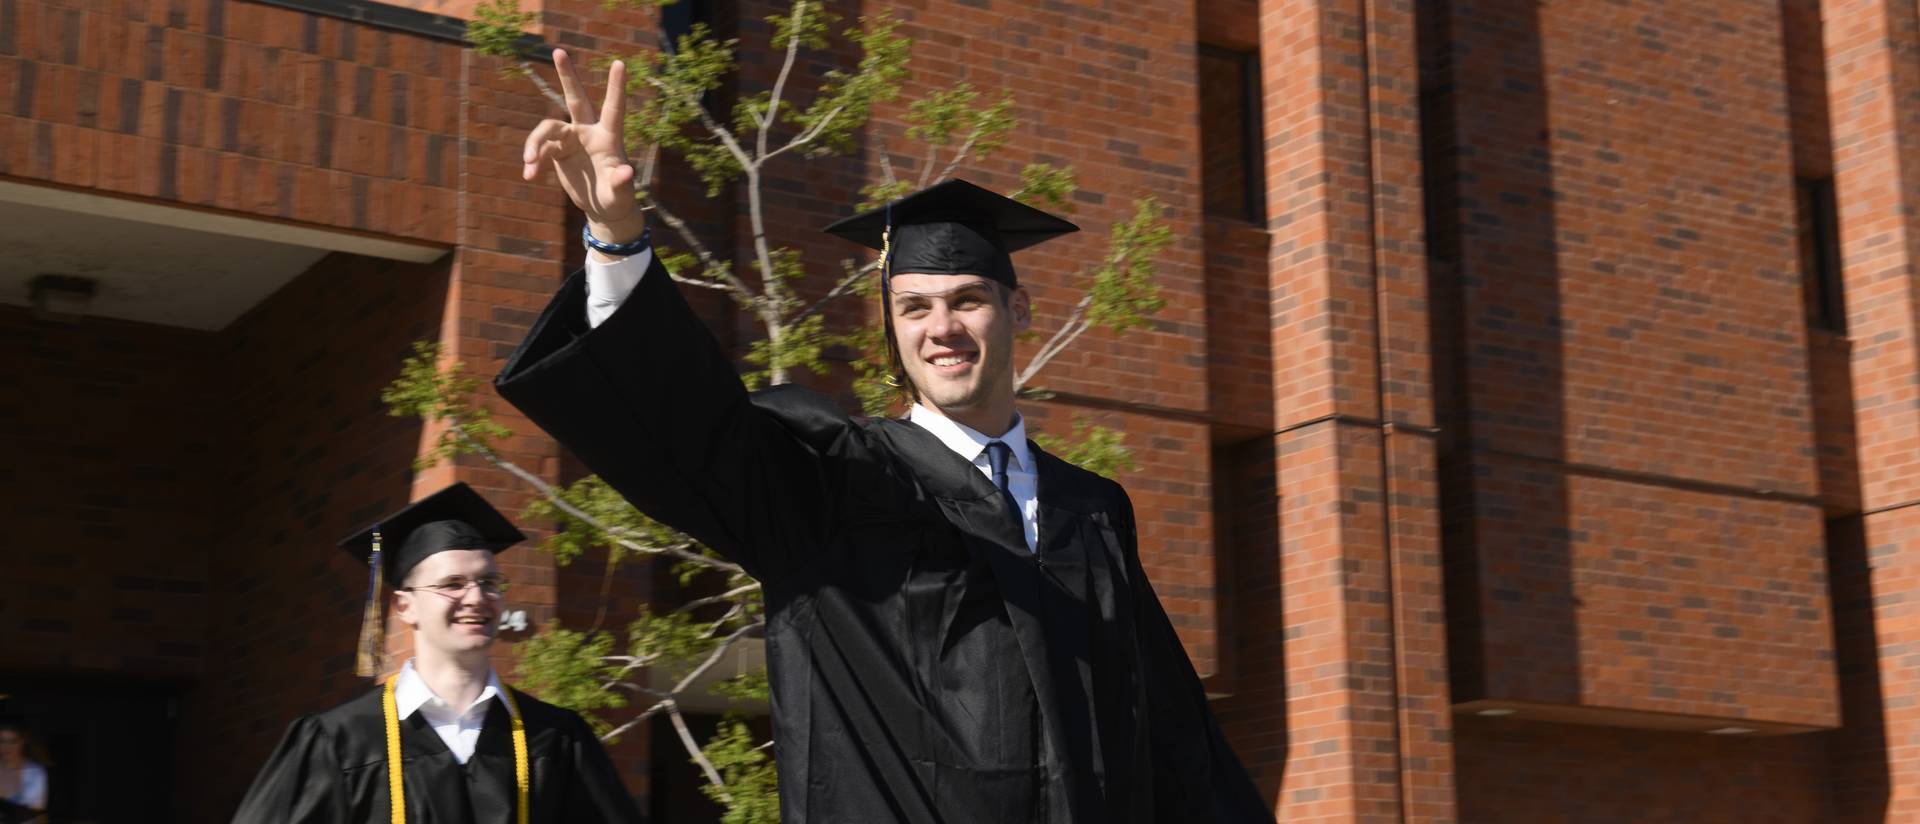 male student in graduate gown giving a peace sign